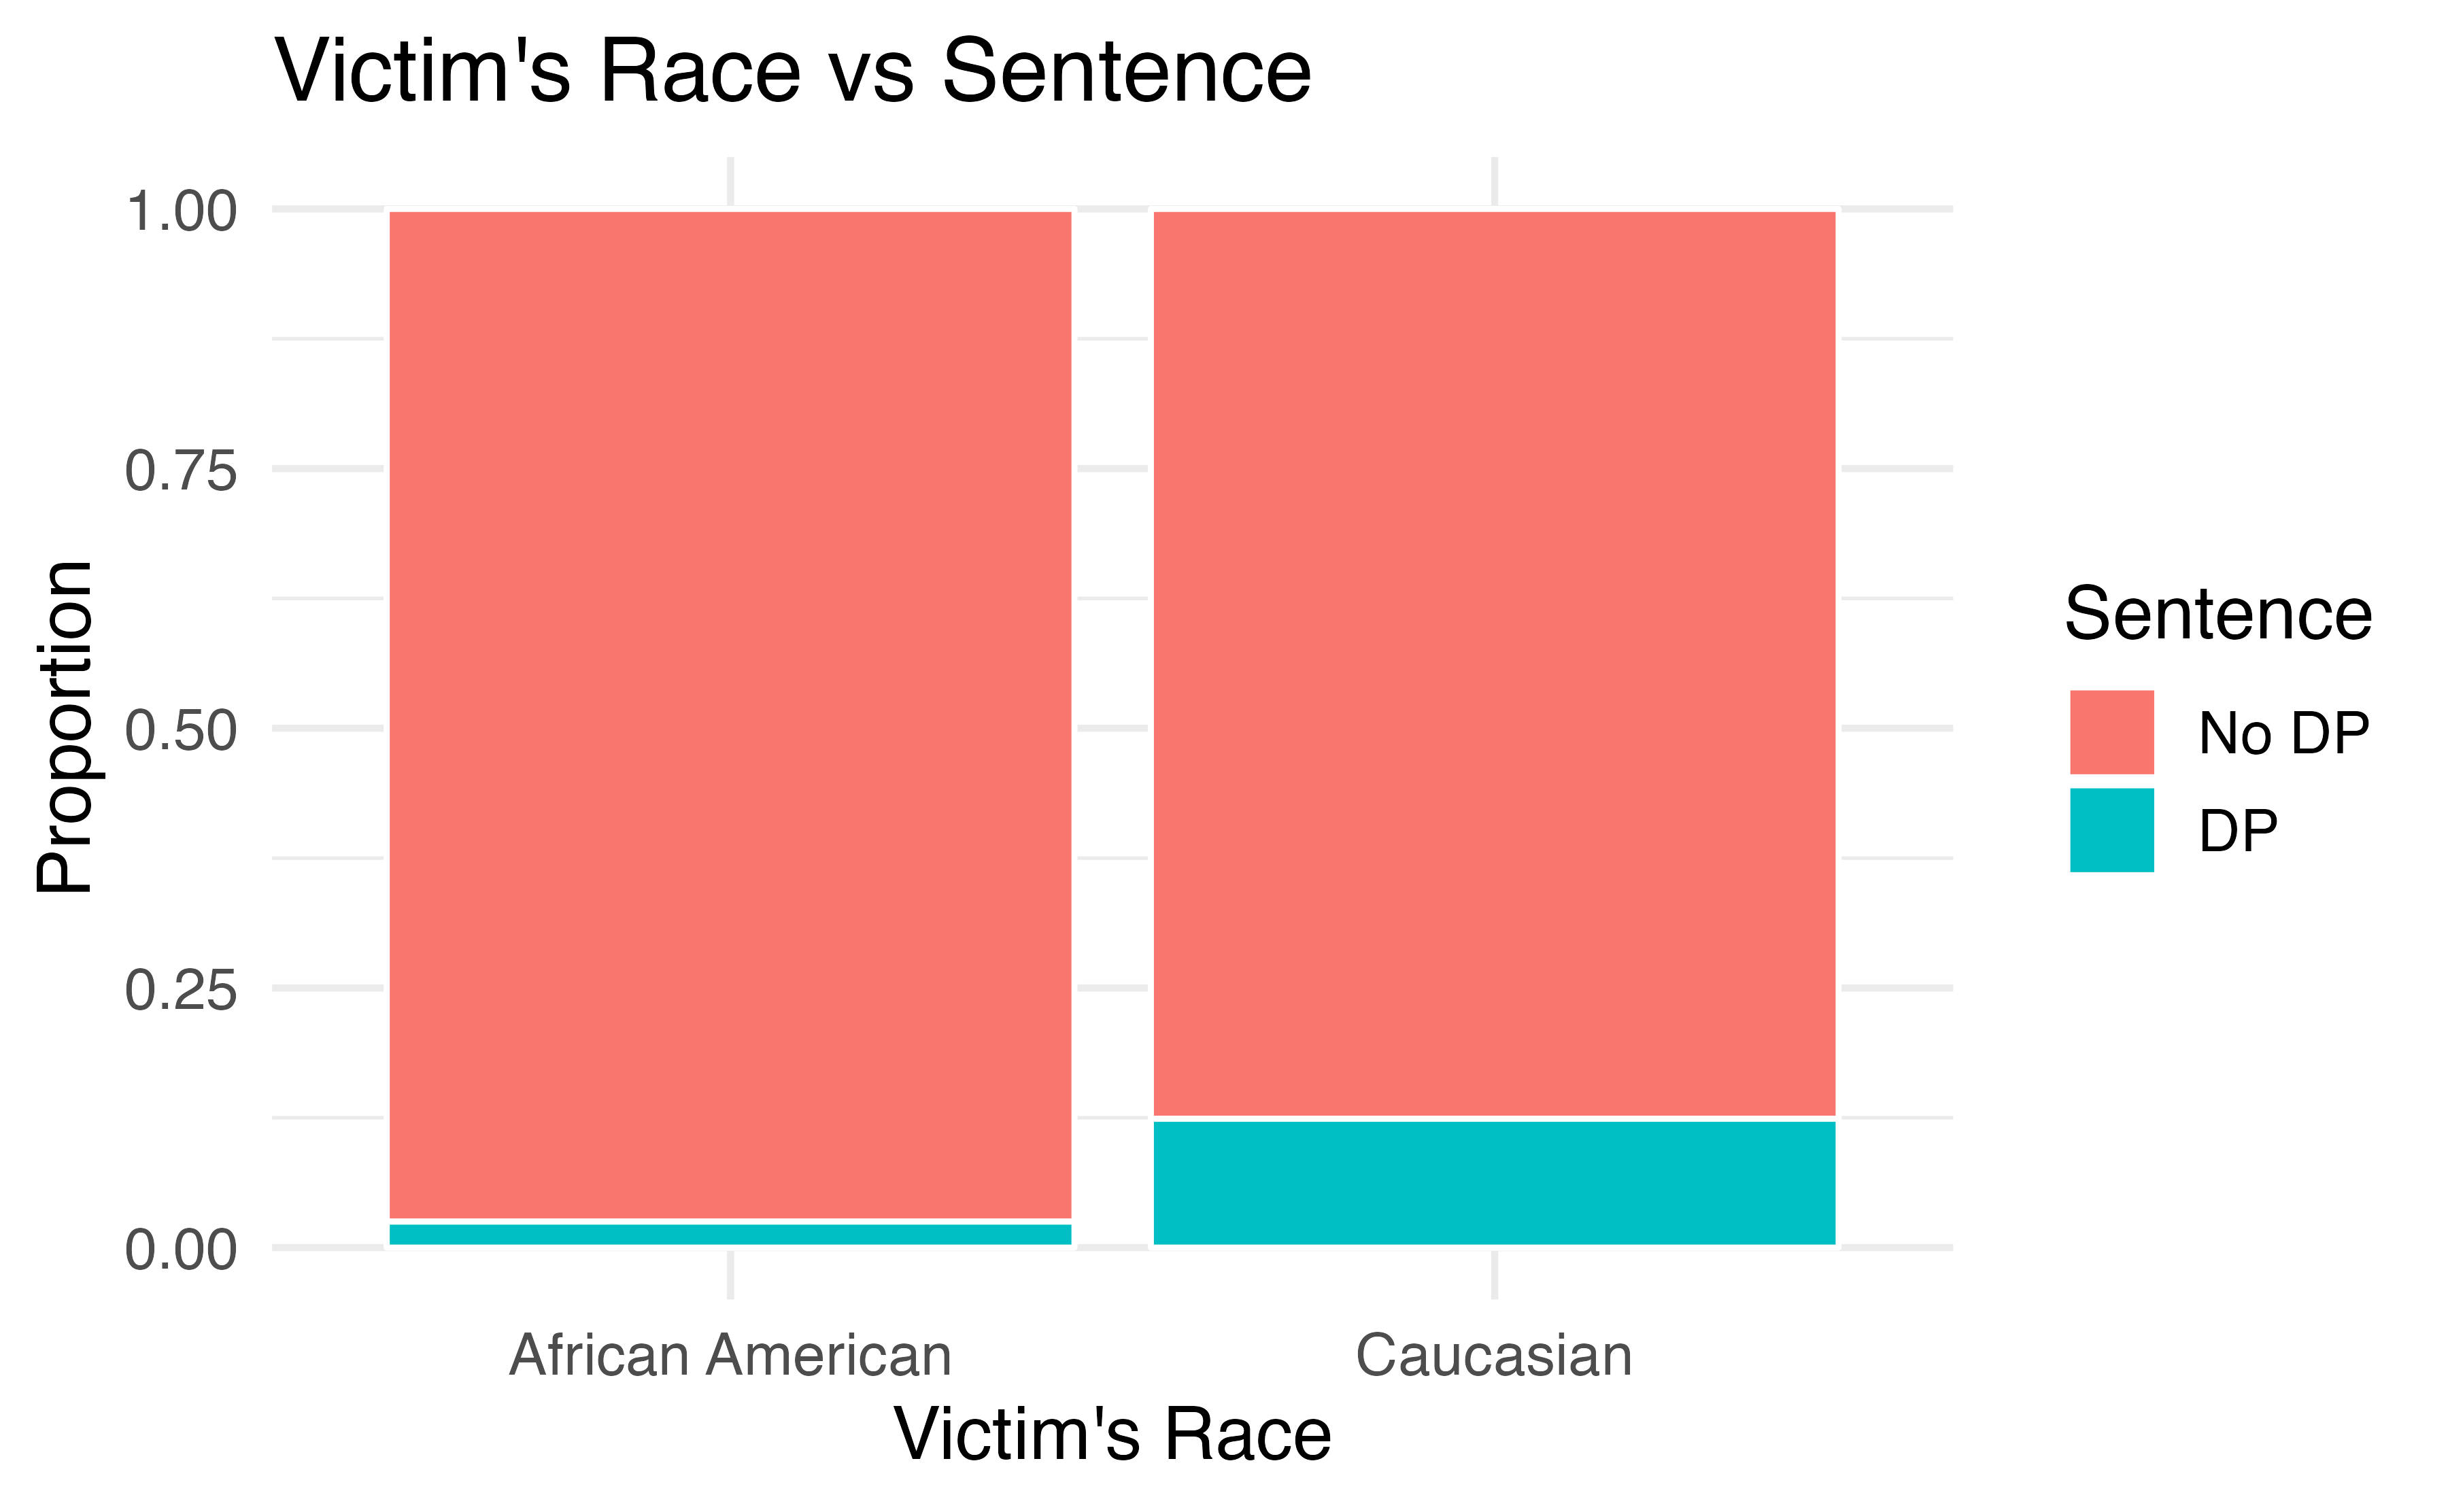 The race of the victim is associated both with the sentence (death penalty or no death penalty) and with the race of the defendant. Defendants are more likely to involve a victim of the same race, and cases with African American victims are less likely to result in the death penalty.